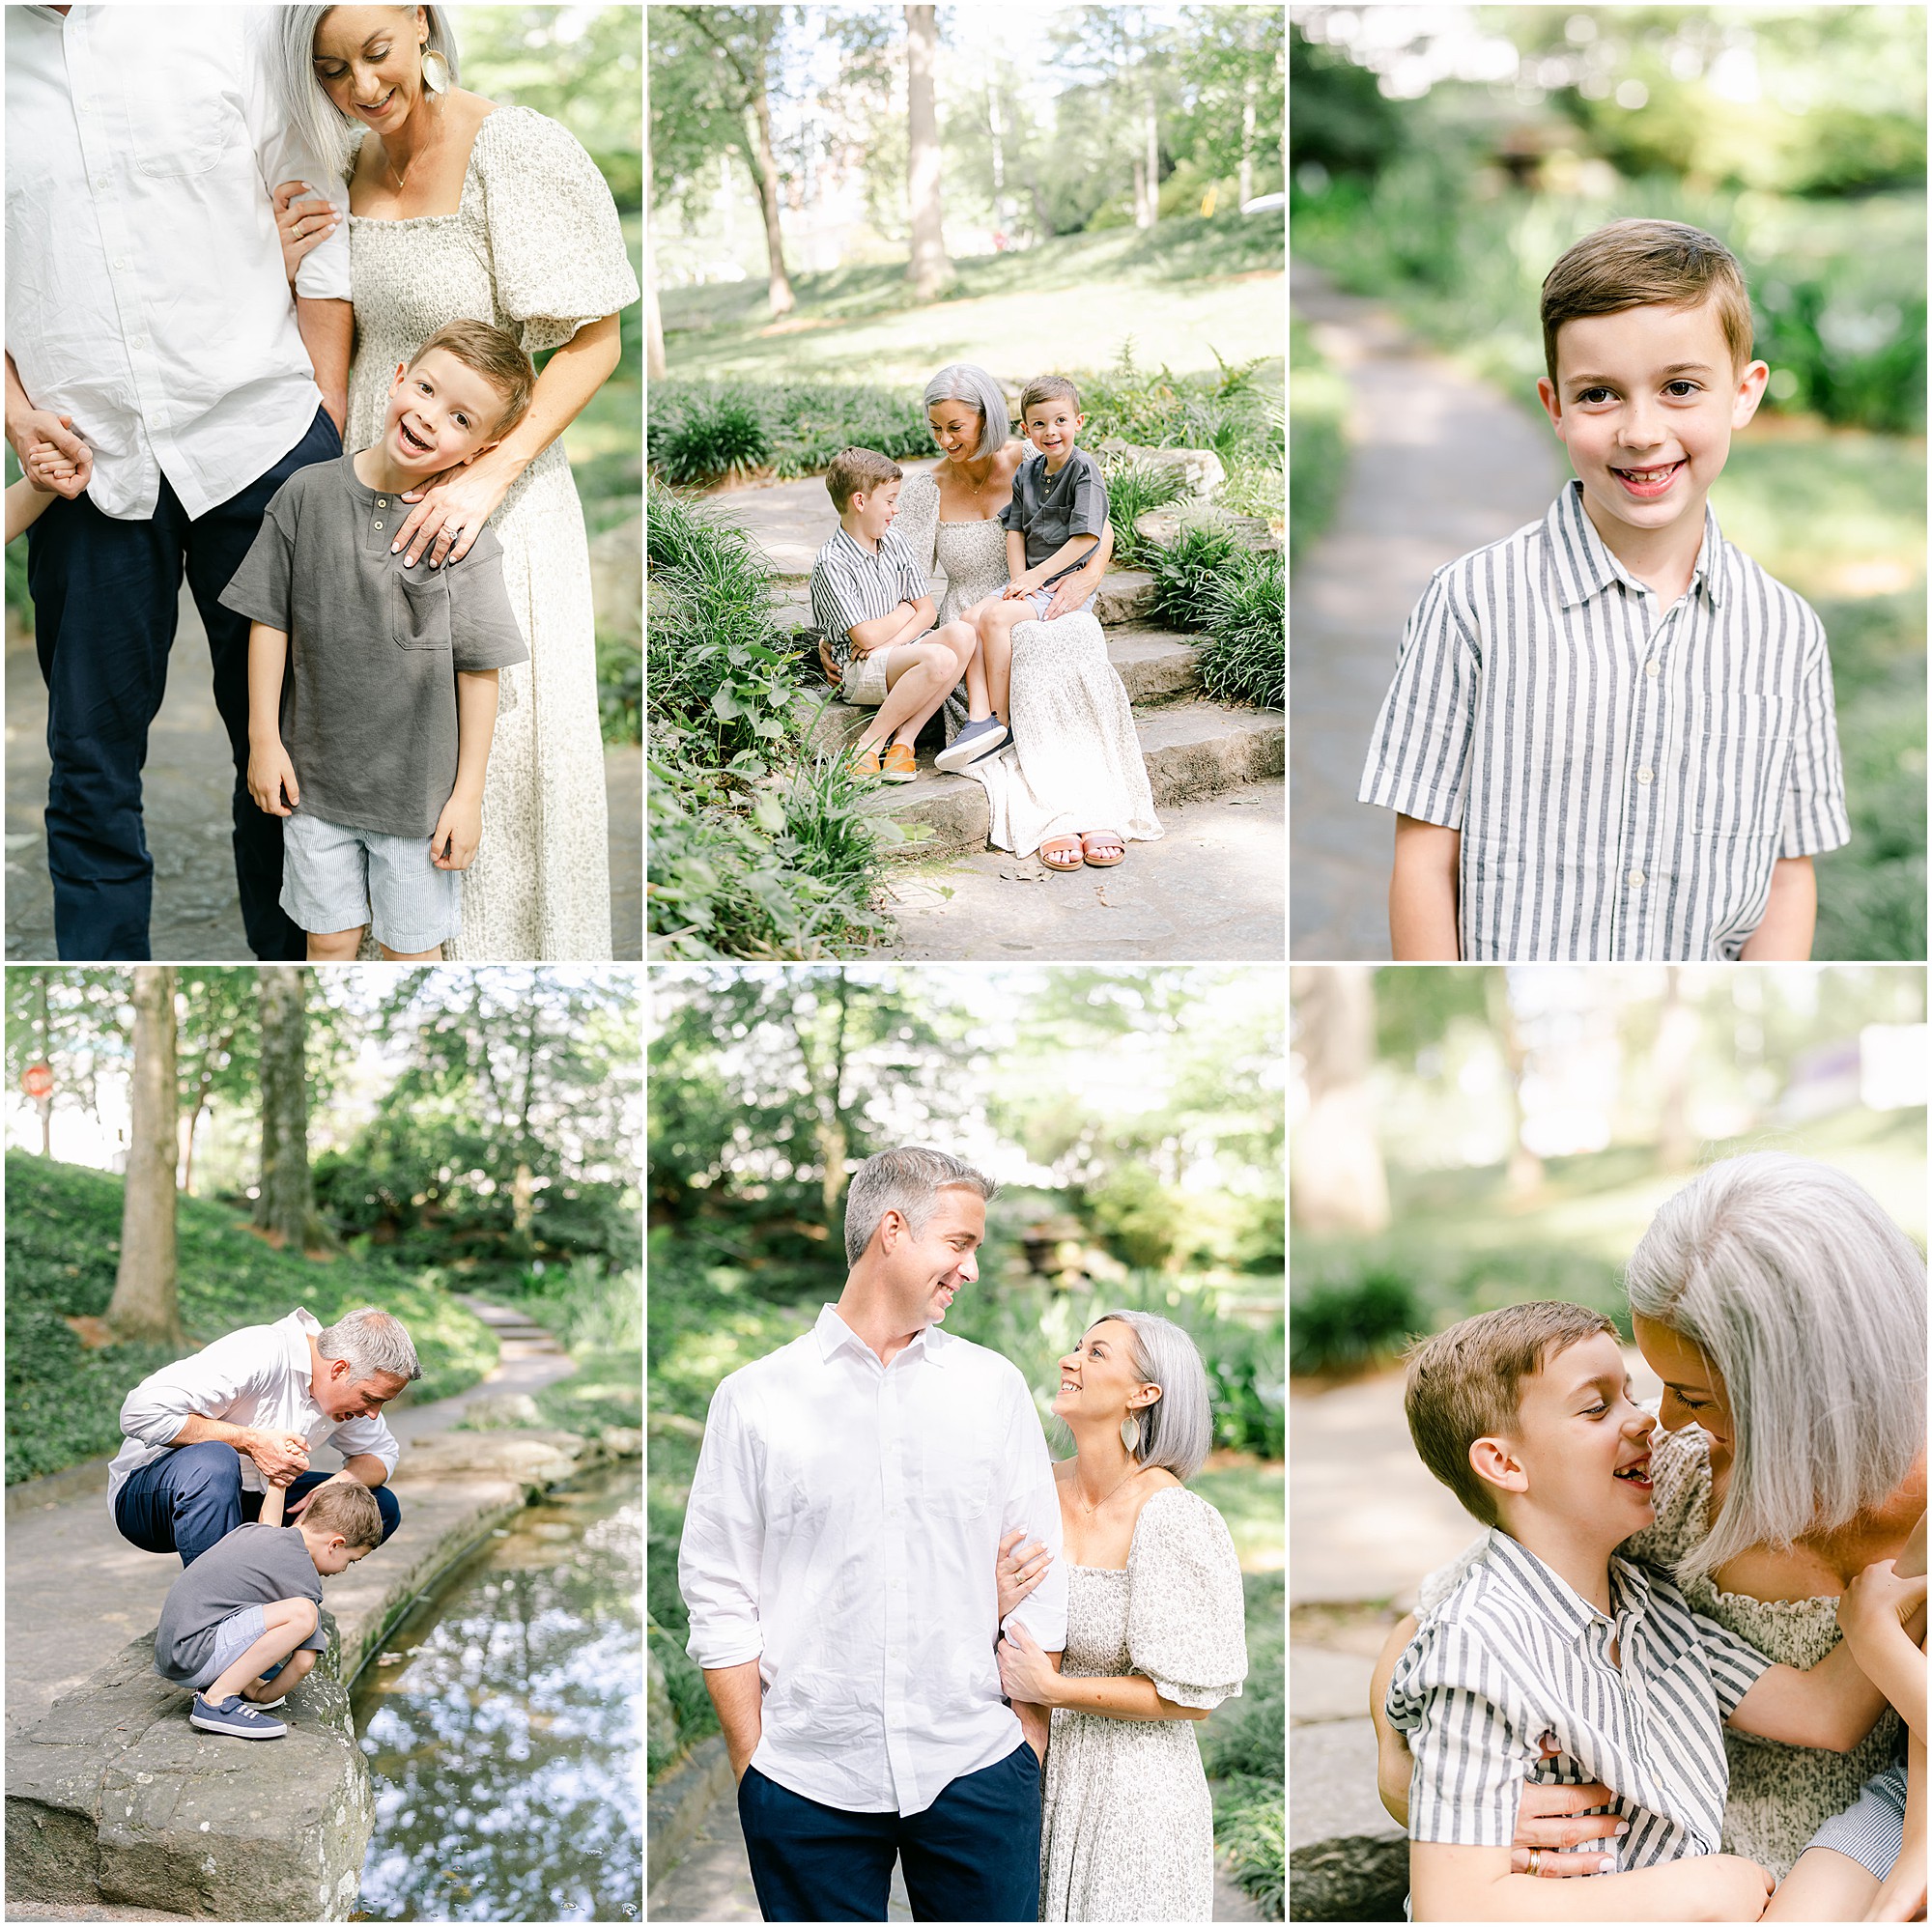 Touching family portraits showcasing the love of a young family.